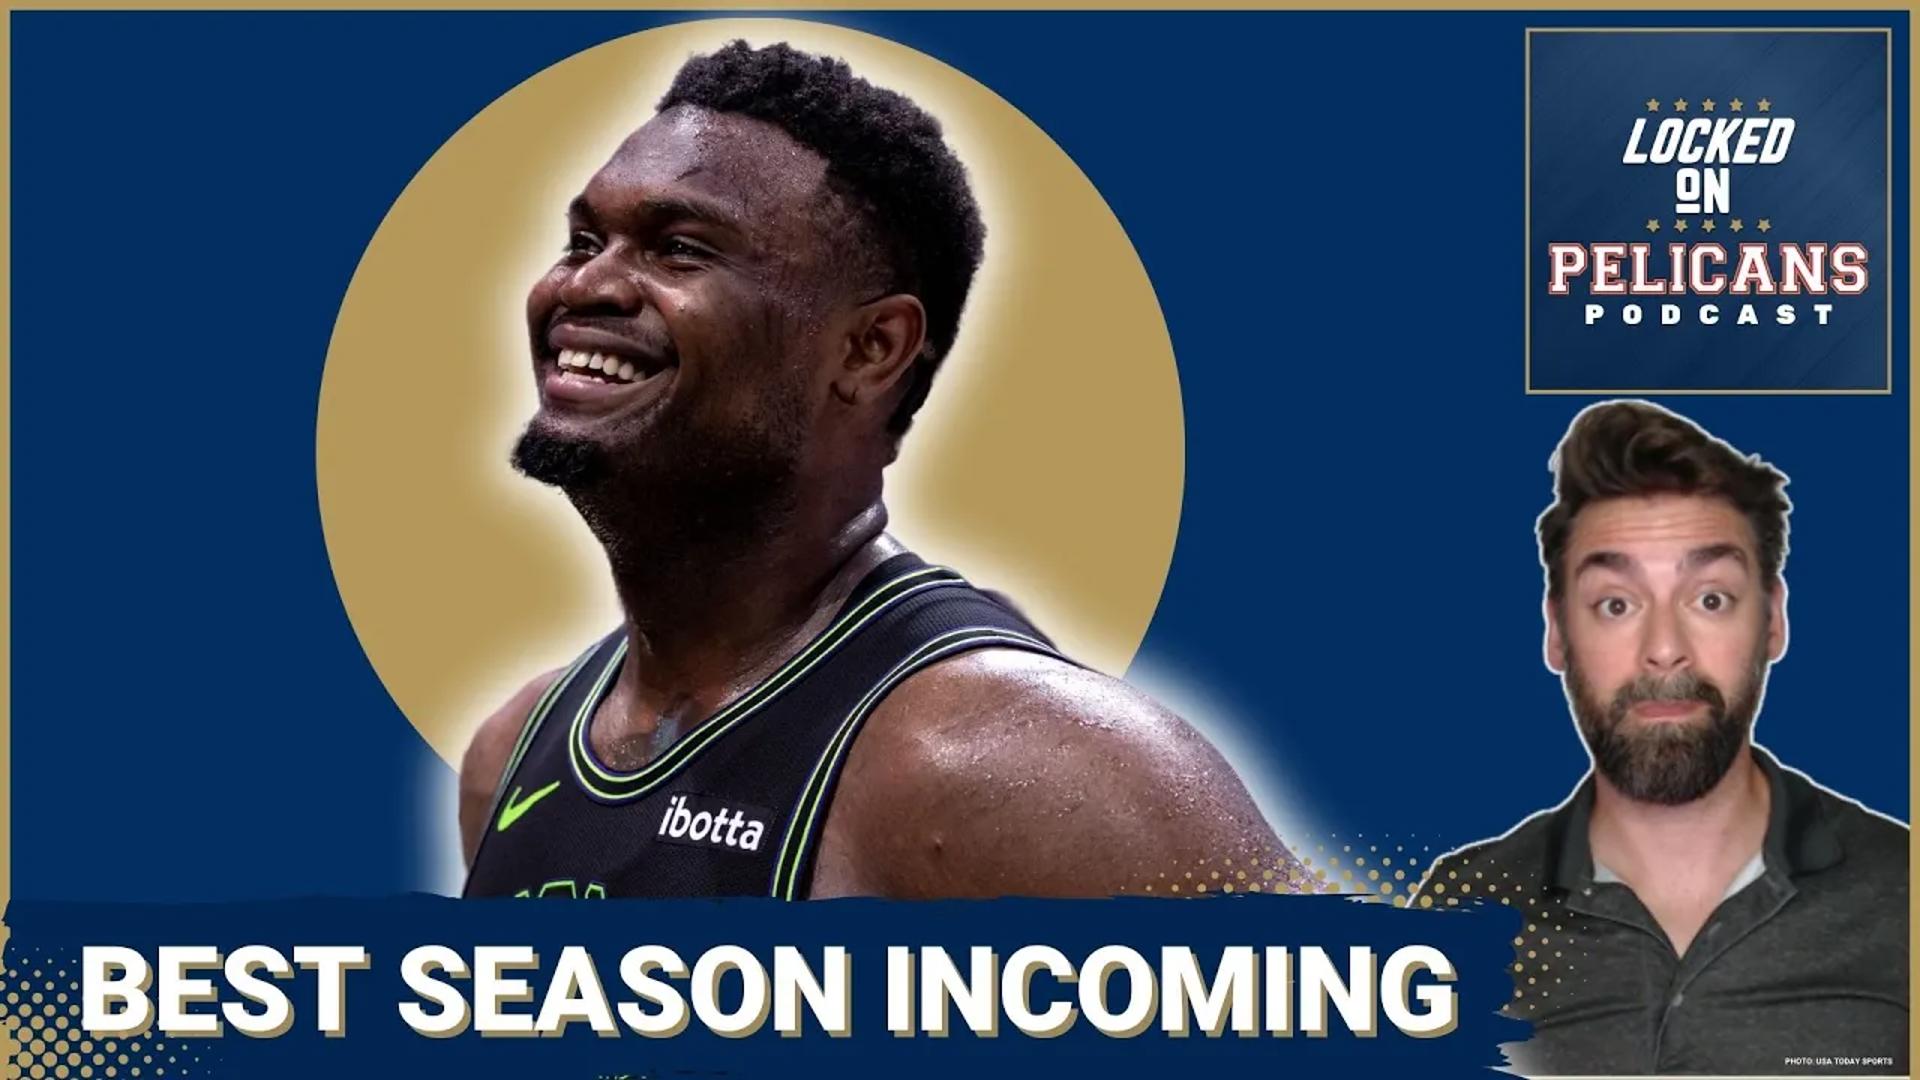 Zion Williamson is primed to have his best season ever next year for the New Orleans Pelicans. Jake Madison explains why Zion will be in shape